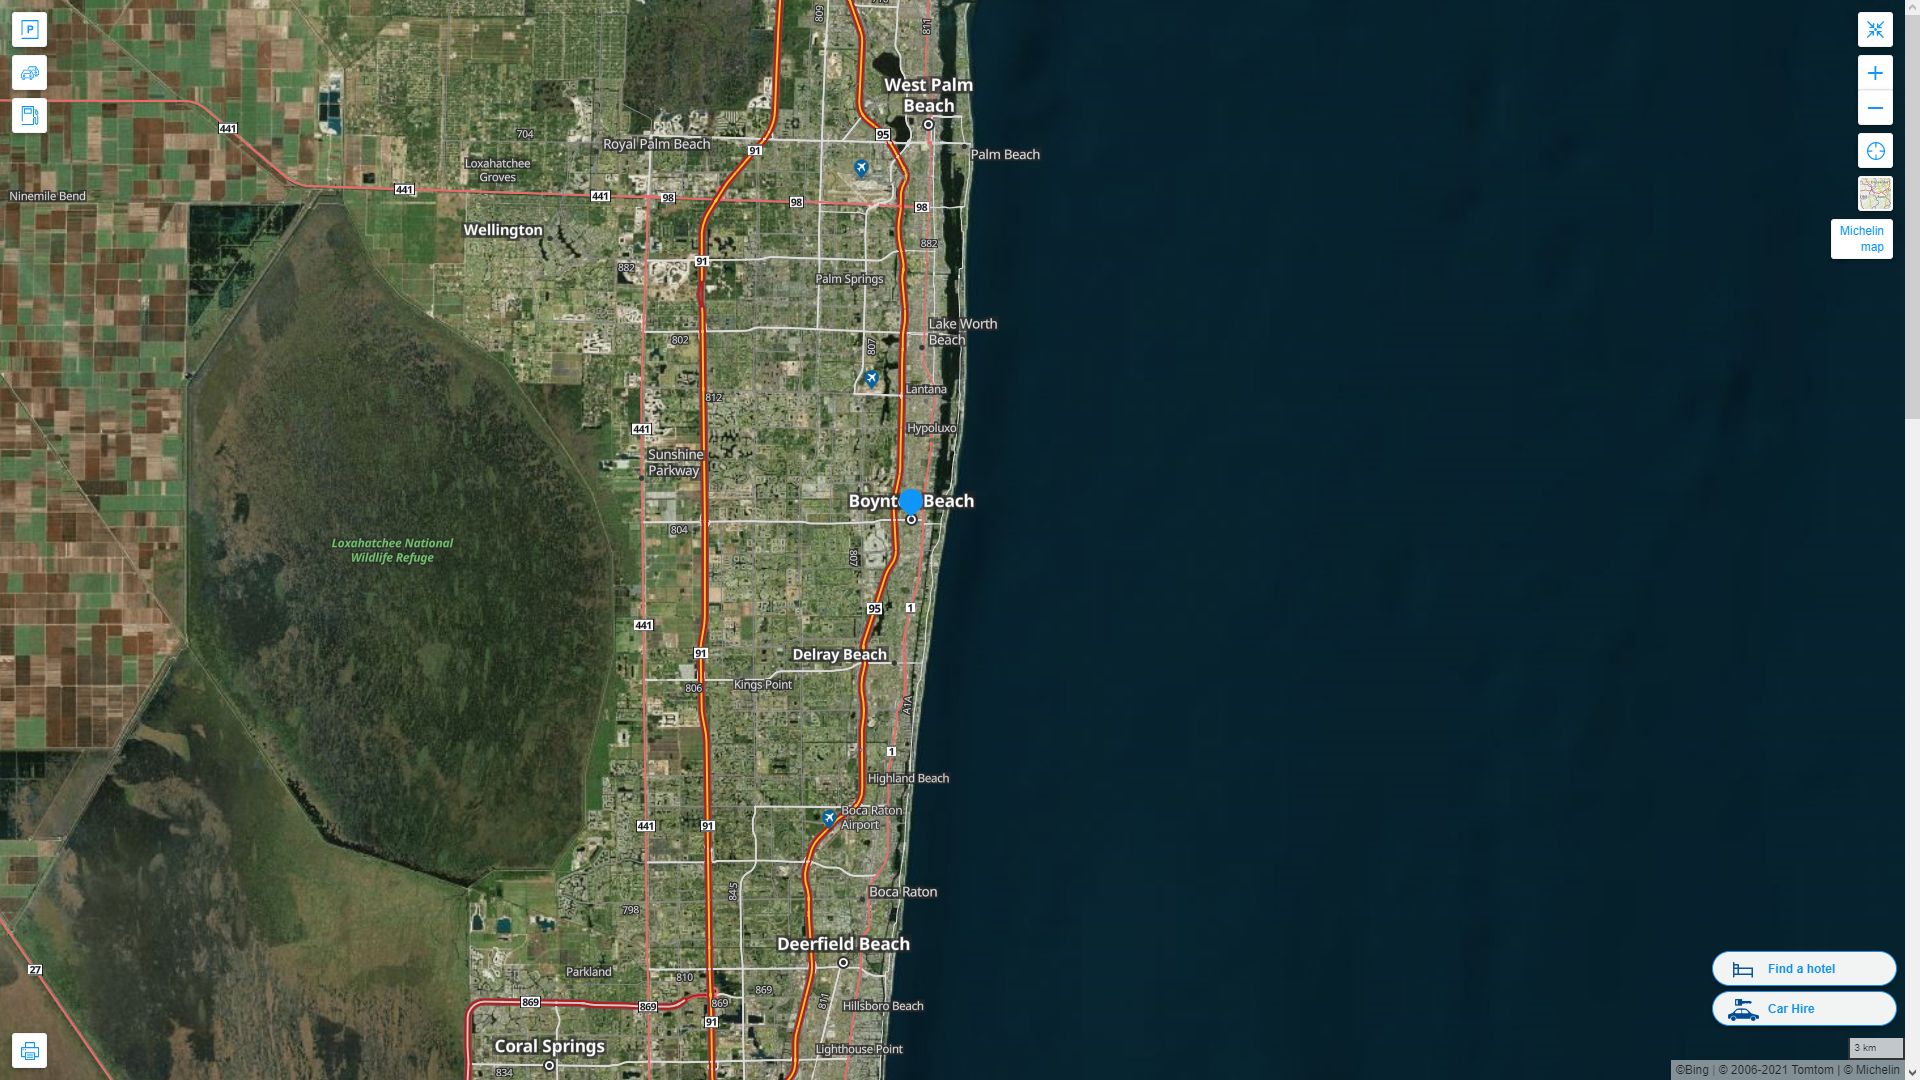 Boynton Beach Florida Highway and Road Map with Satellite View